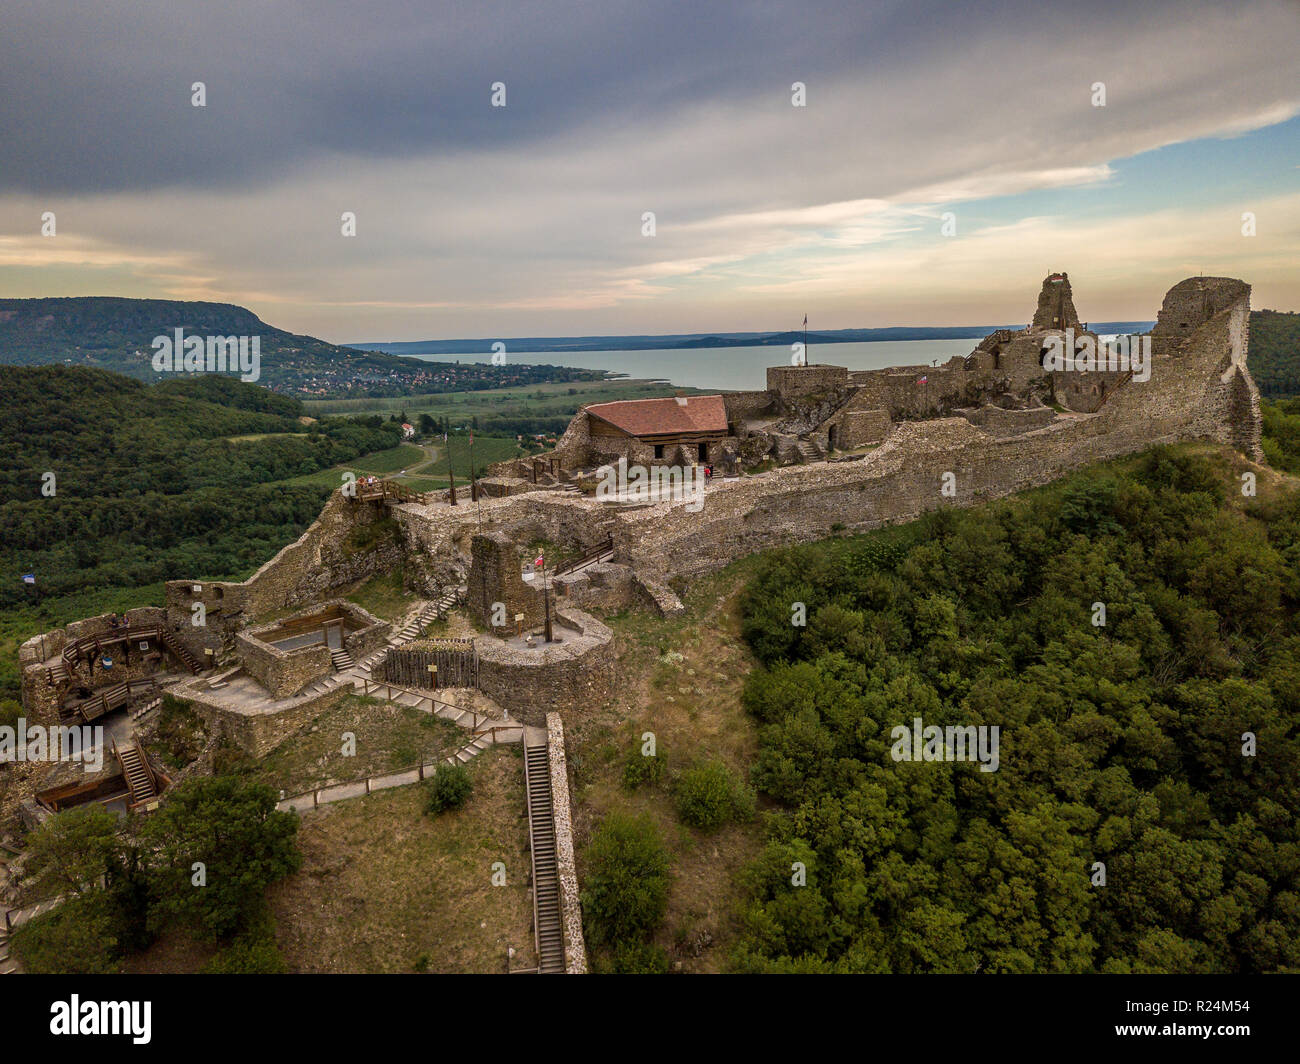 Aerial view of Szigliget castle over Lake Balaton in Hungary Stock Photo